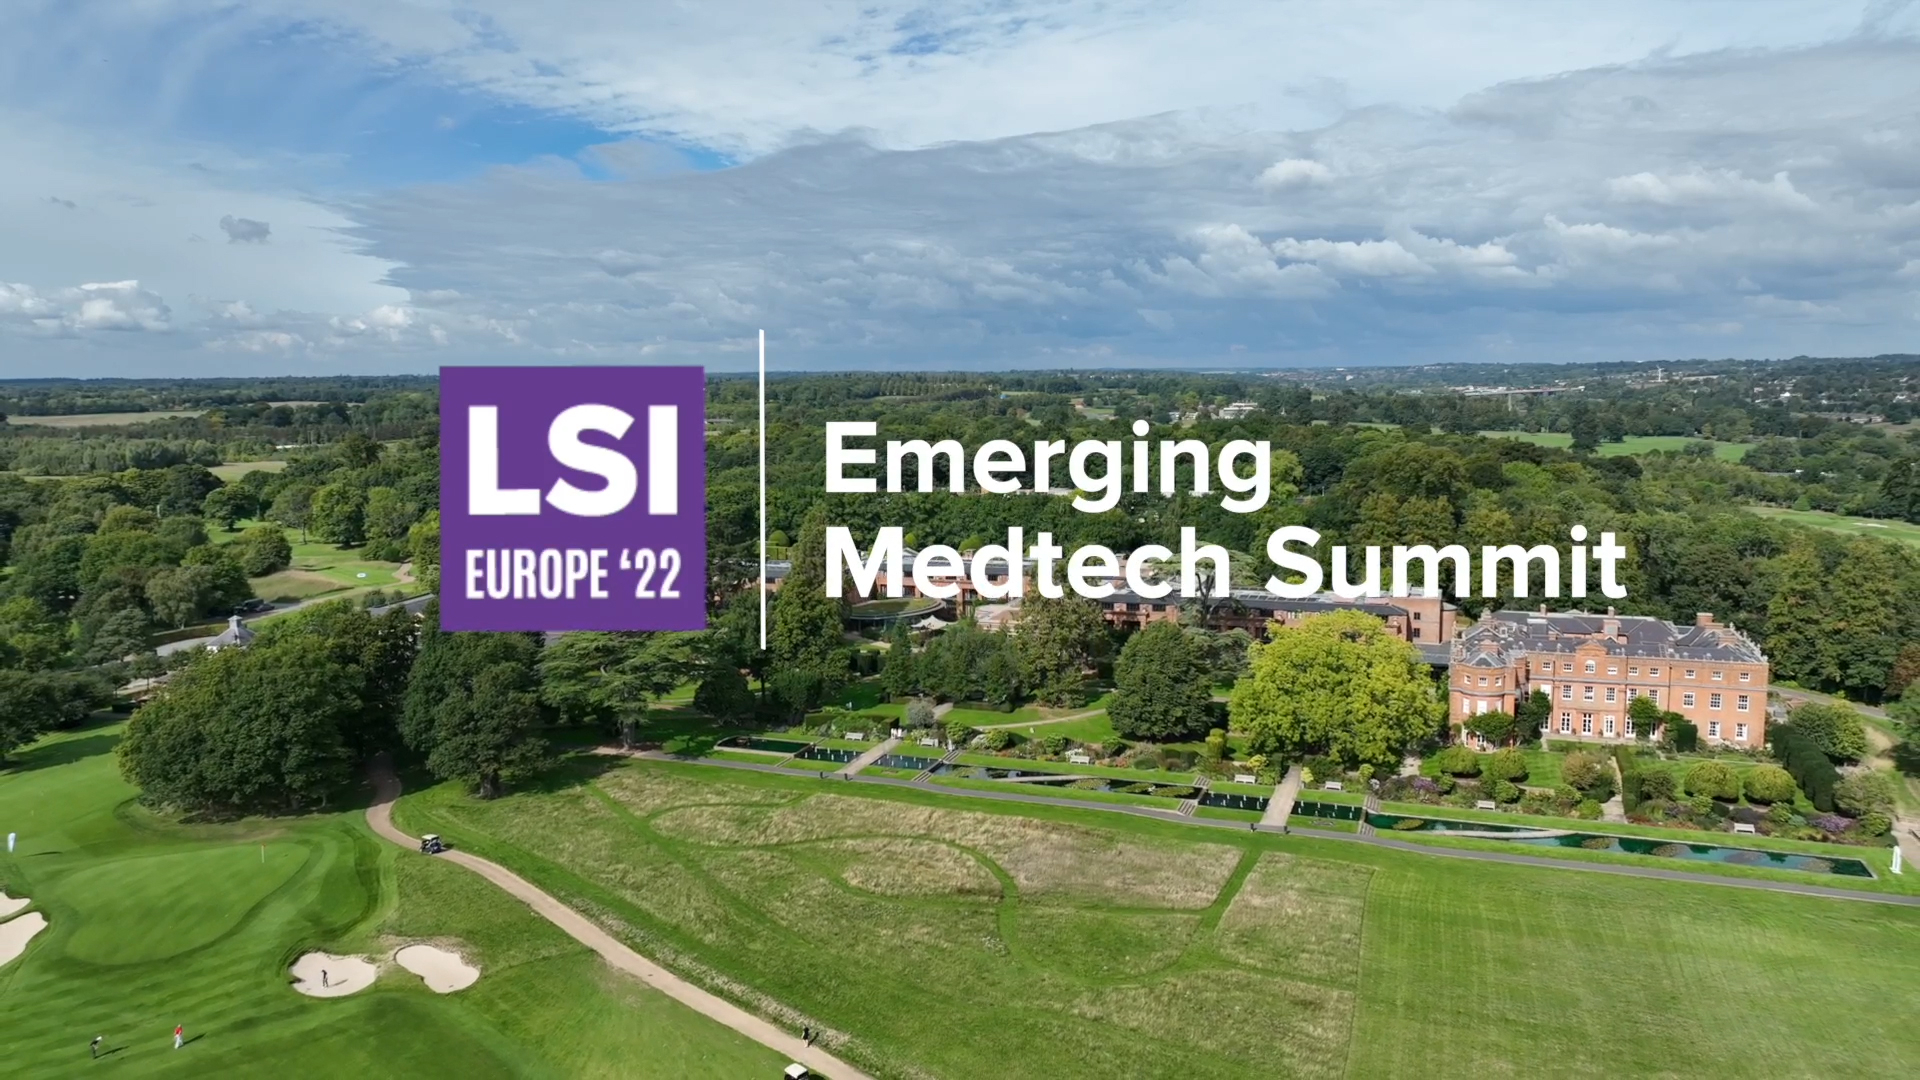 Join thousands of Medtech leaders at LSI’s Emerging Medtech Summits to access the community, capital, and insights that help you grow.